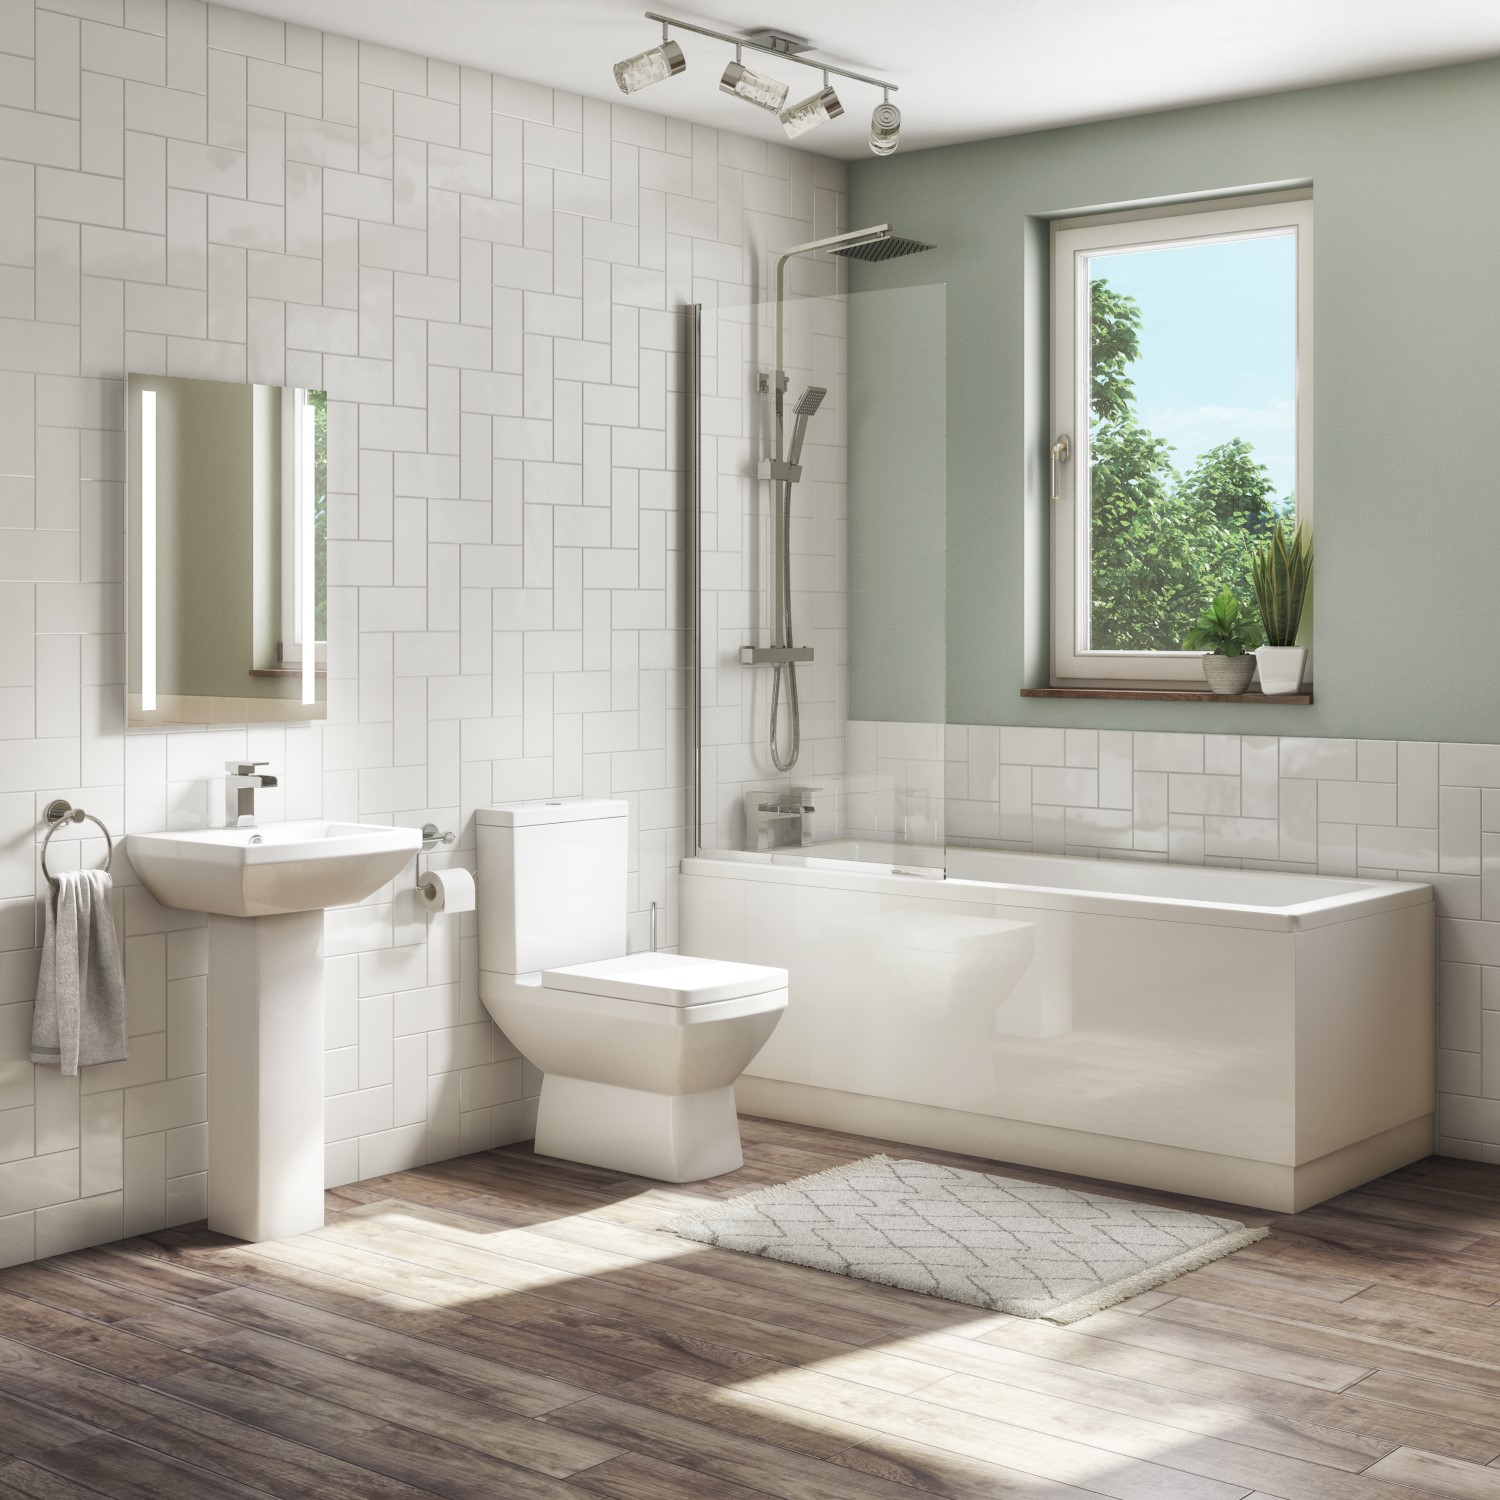 1700mm Straight Bath Suite with Panel Toilet & Basin - Tabor